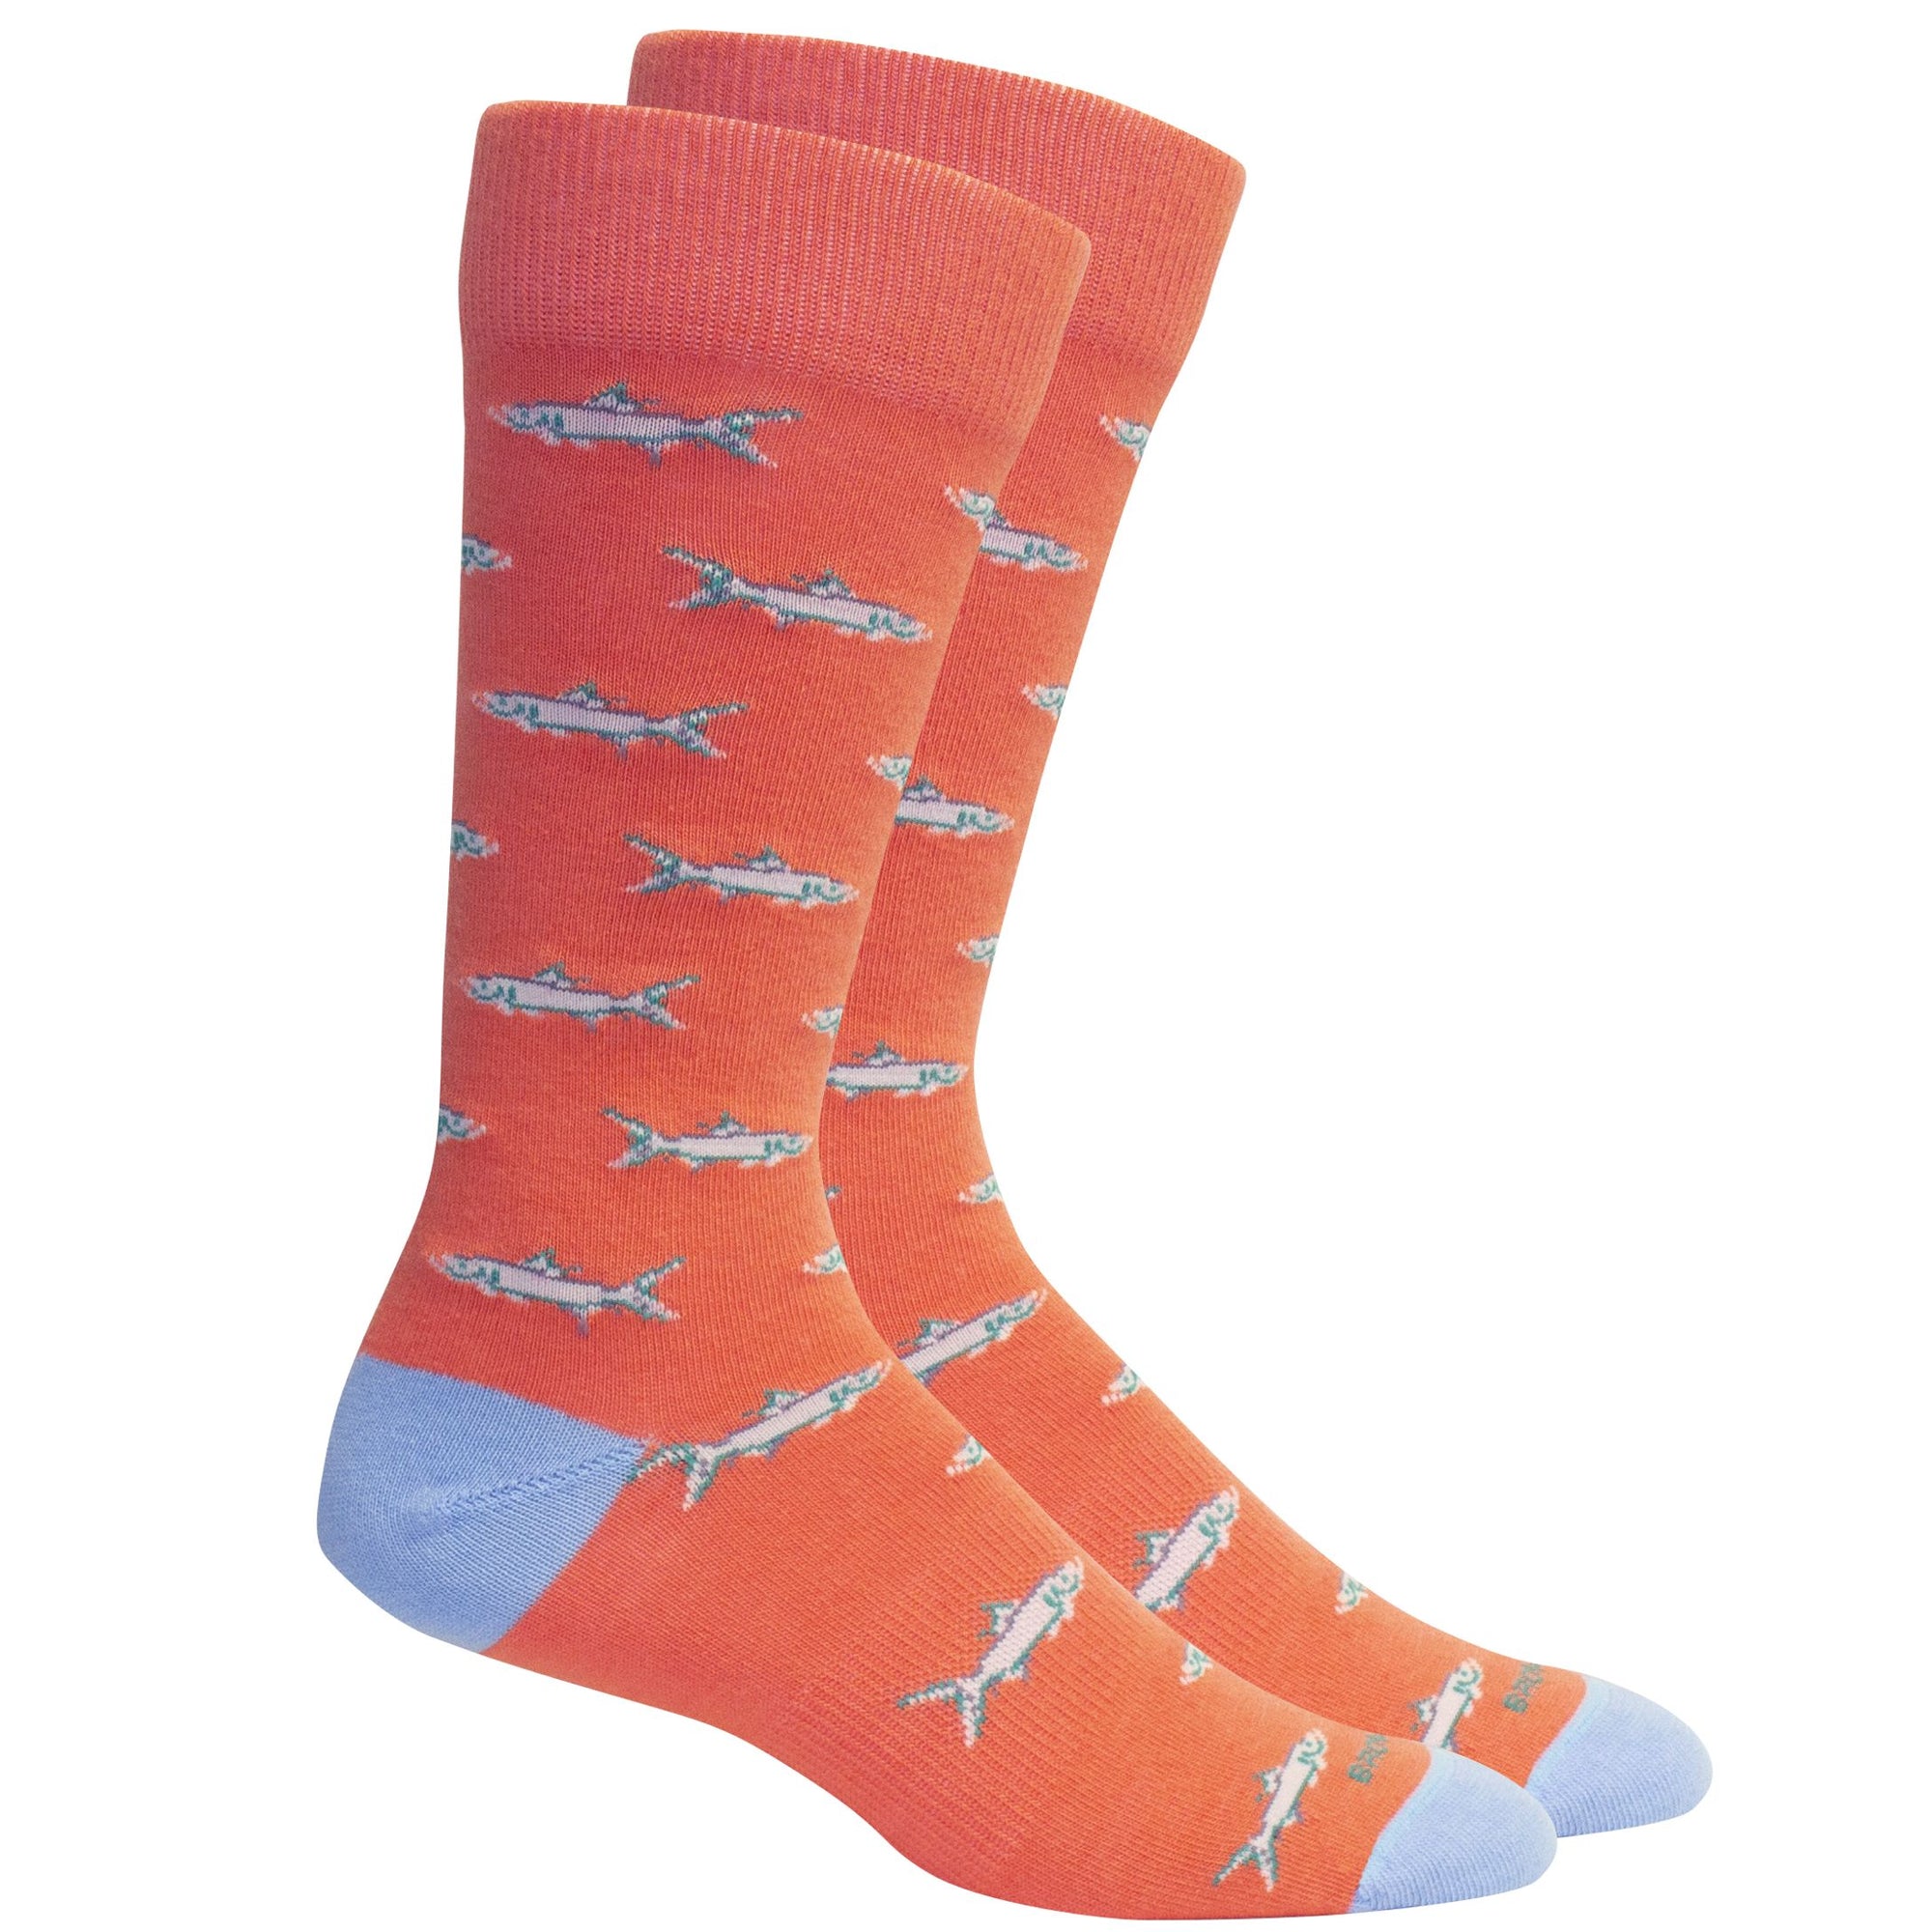 'Fort Myers' Tarpon Cotton Socks in Dubarry by Brown Dog Hosiery